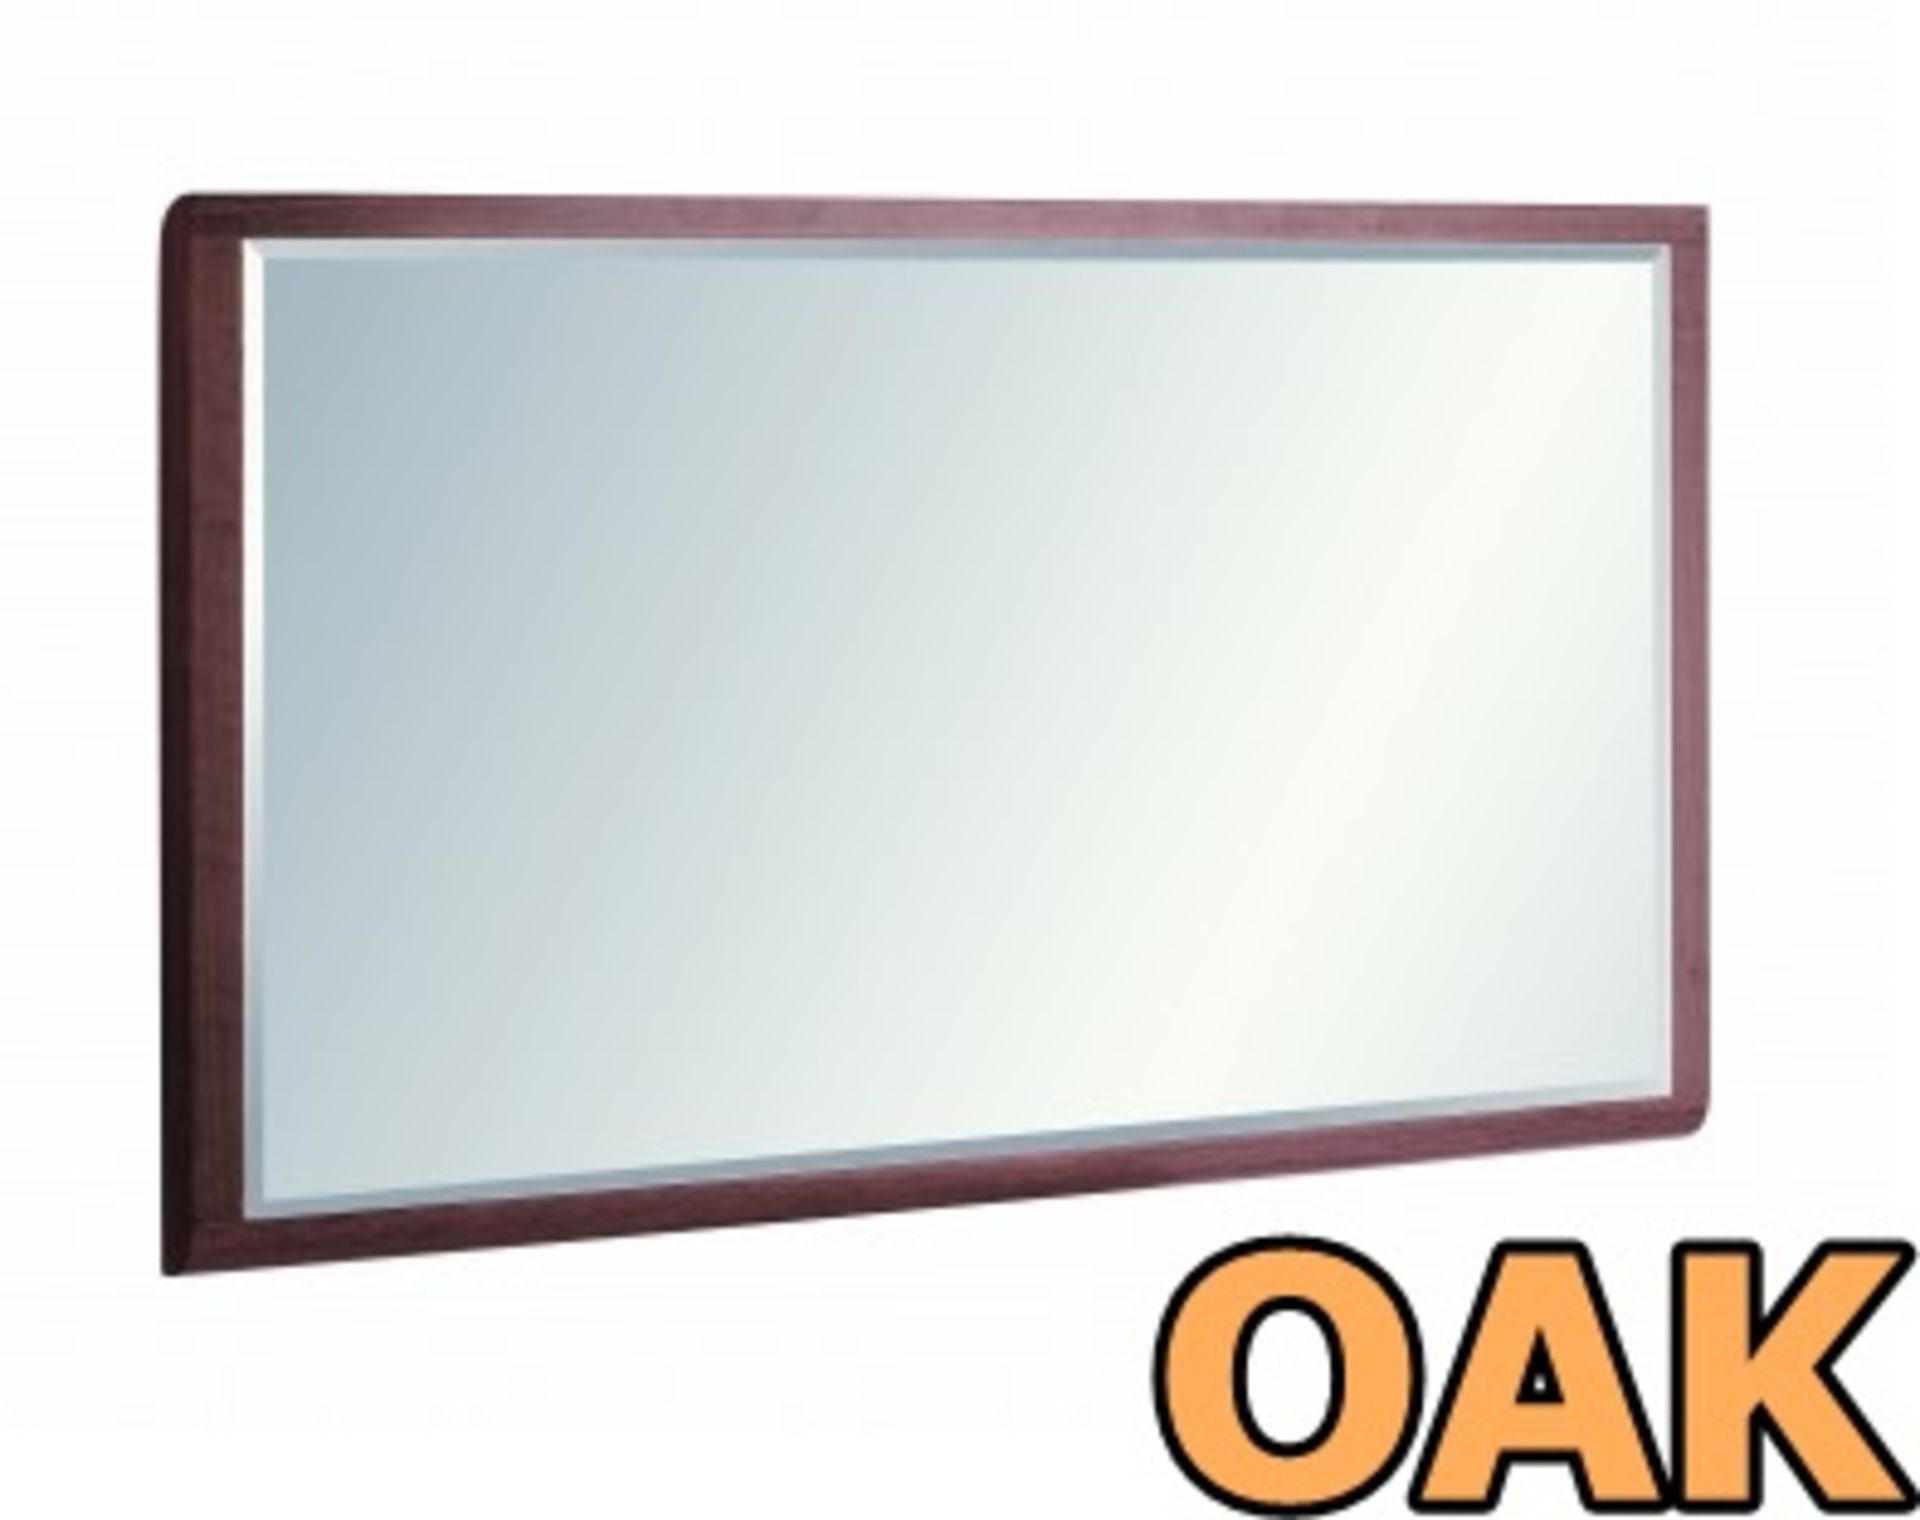 1 x Vogue ARC Series 1 Wall Mounted WALL MIRROR In LIGHT OAK - Size 1000 x 600mm - Manufactured to